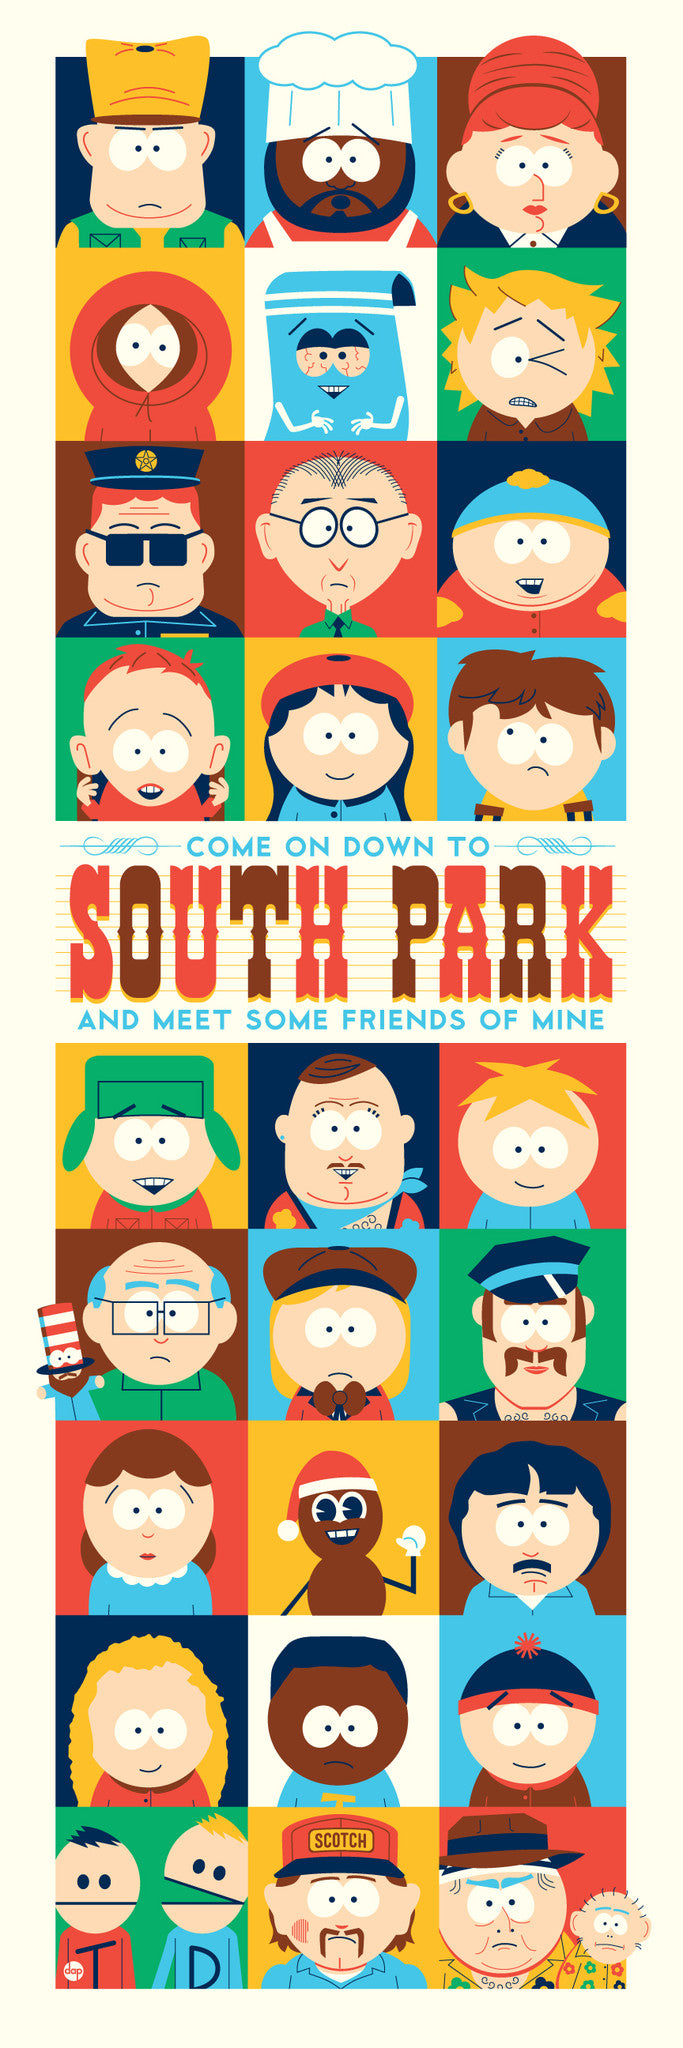 Dave Perillo "Come On Down To South Park And Meet Some Friends Of Mine"